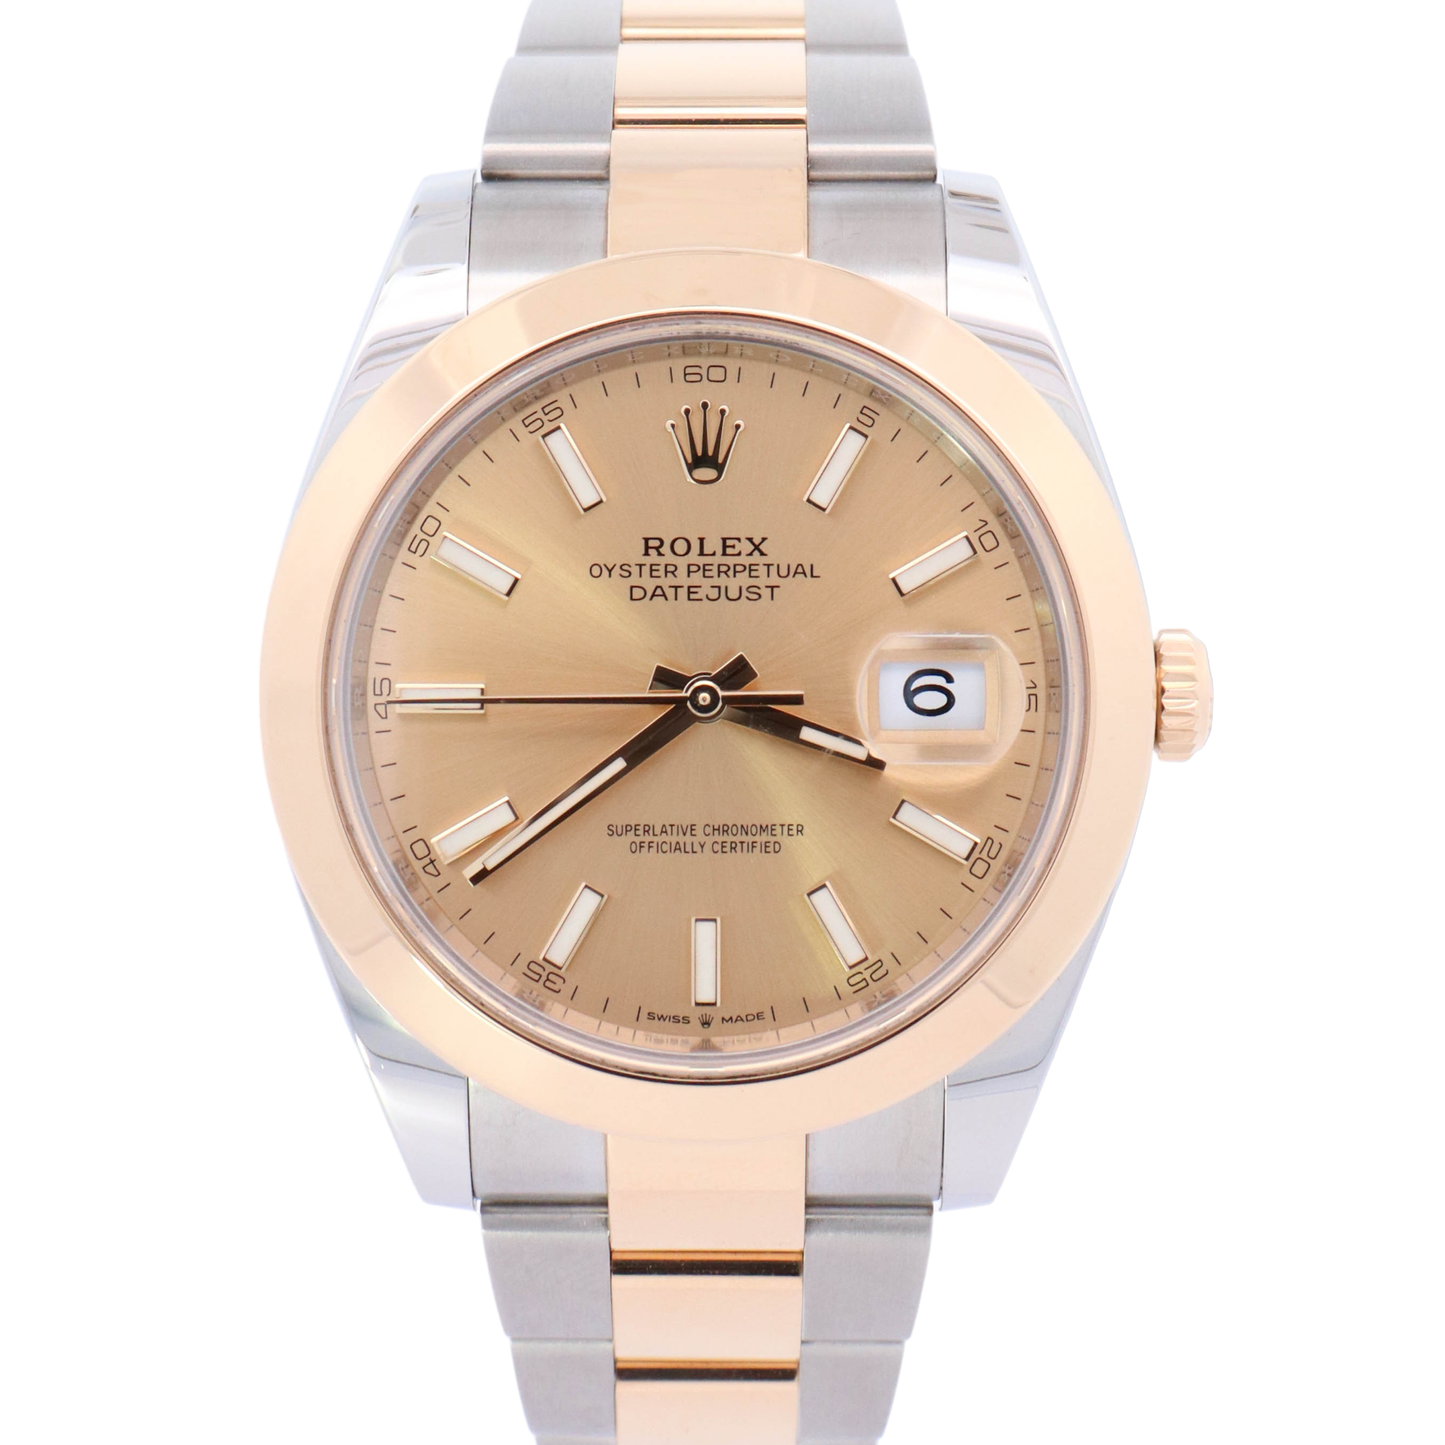 Rolex Datejust Two-Tone Stainless Steel & Yellow Gold 41mm Champagne Stick Dial Watch Reference# 126303 - Happy Jewelers Fine Jewelry Lifetime Warranty